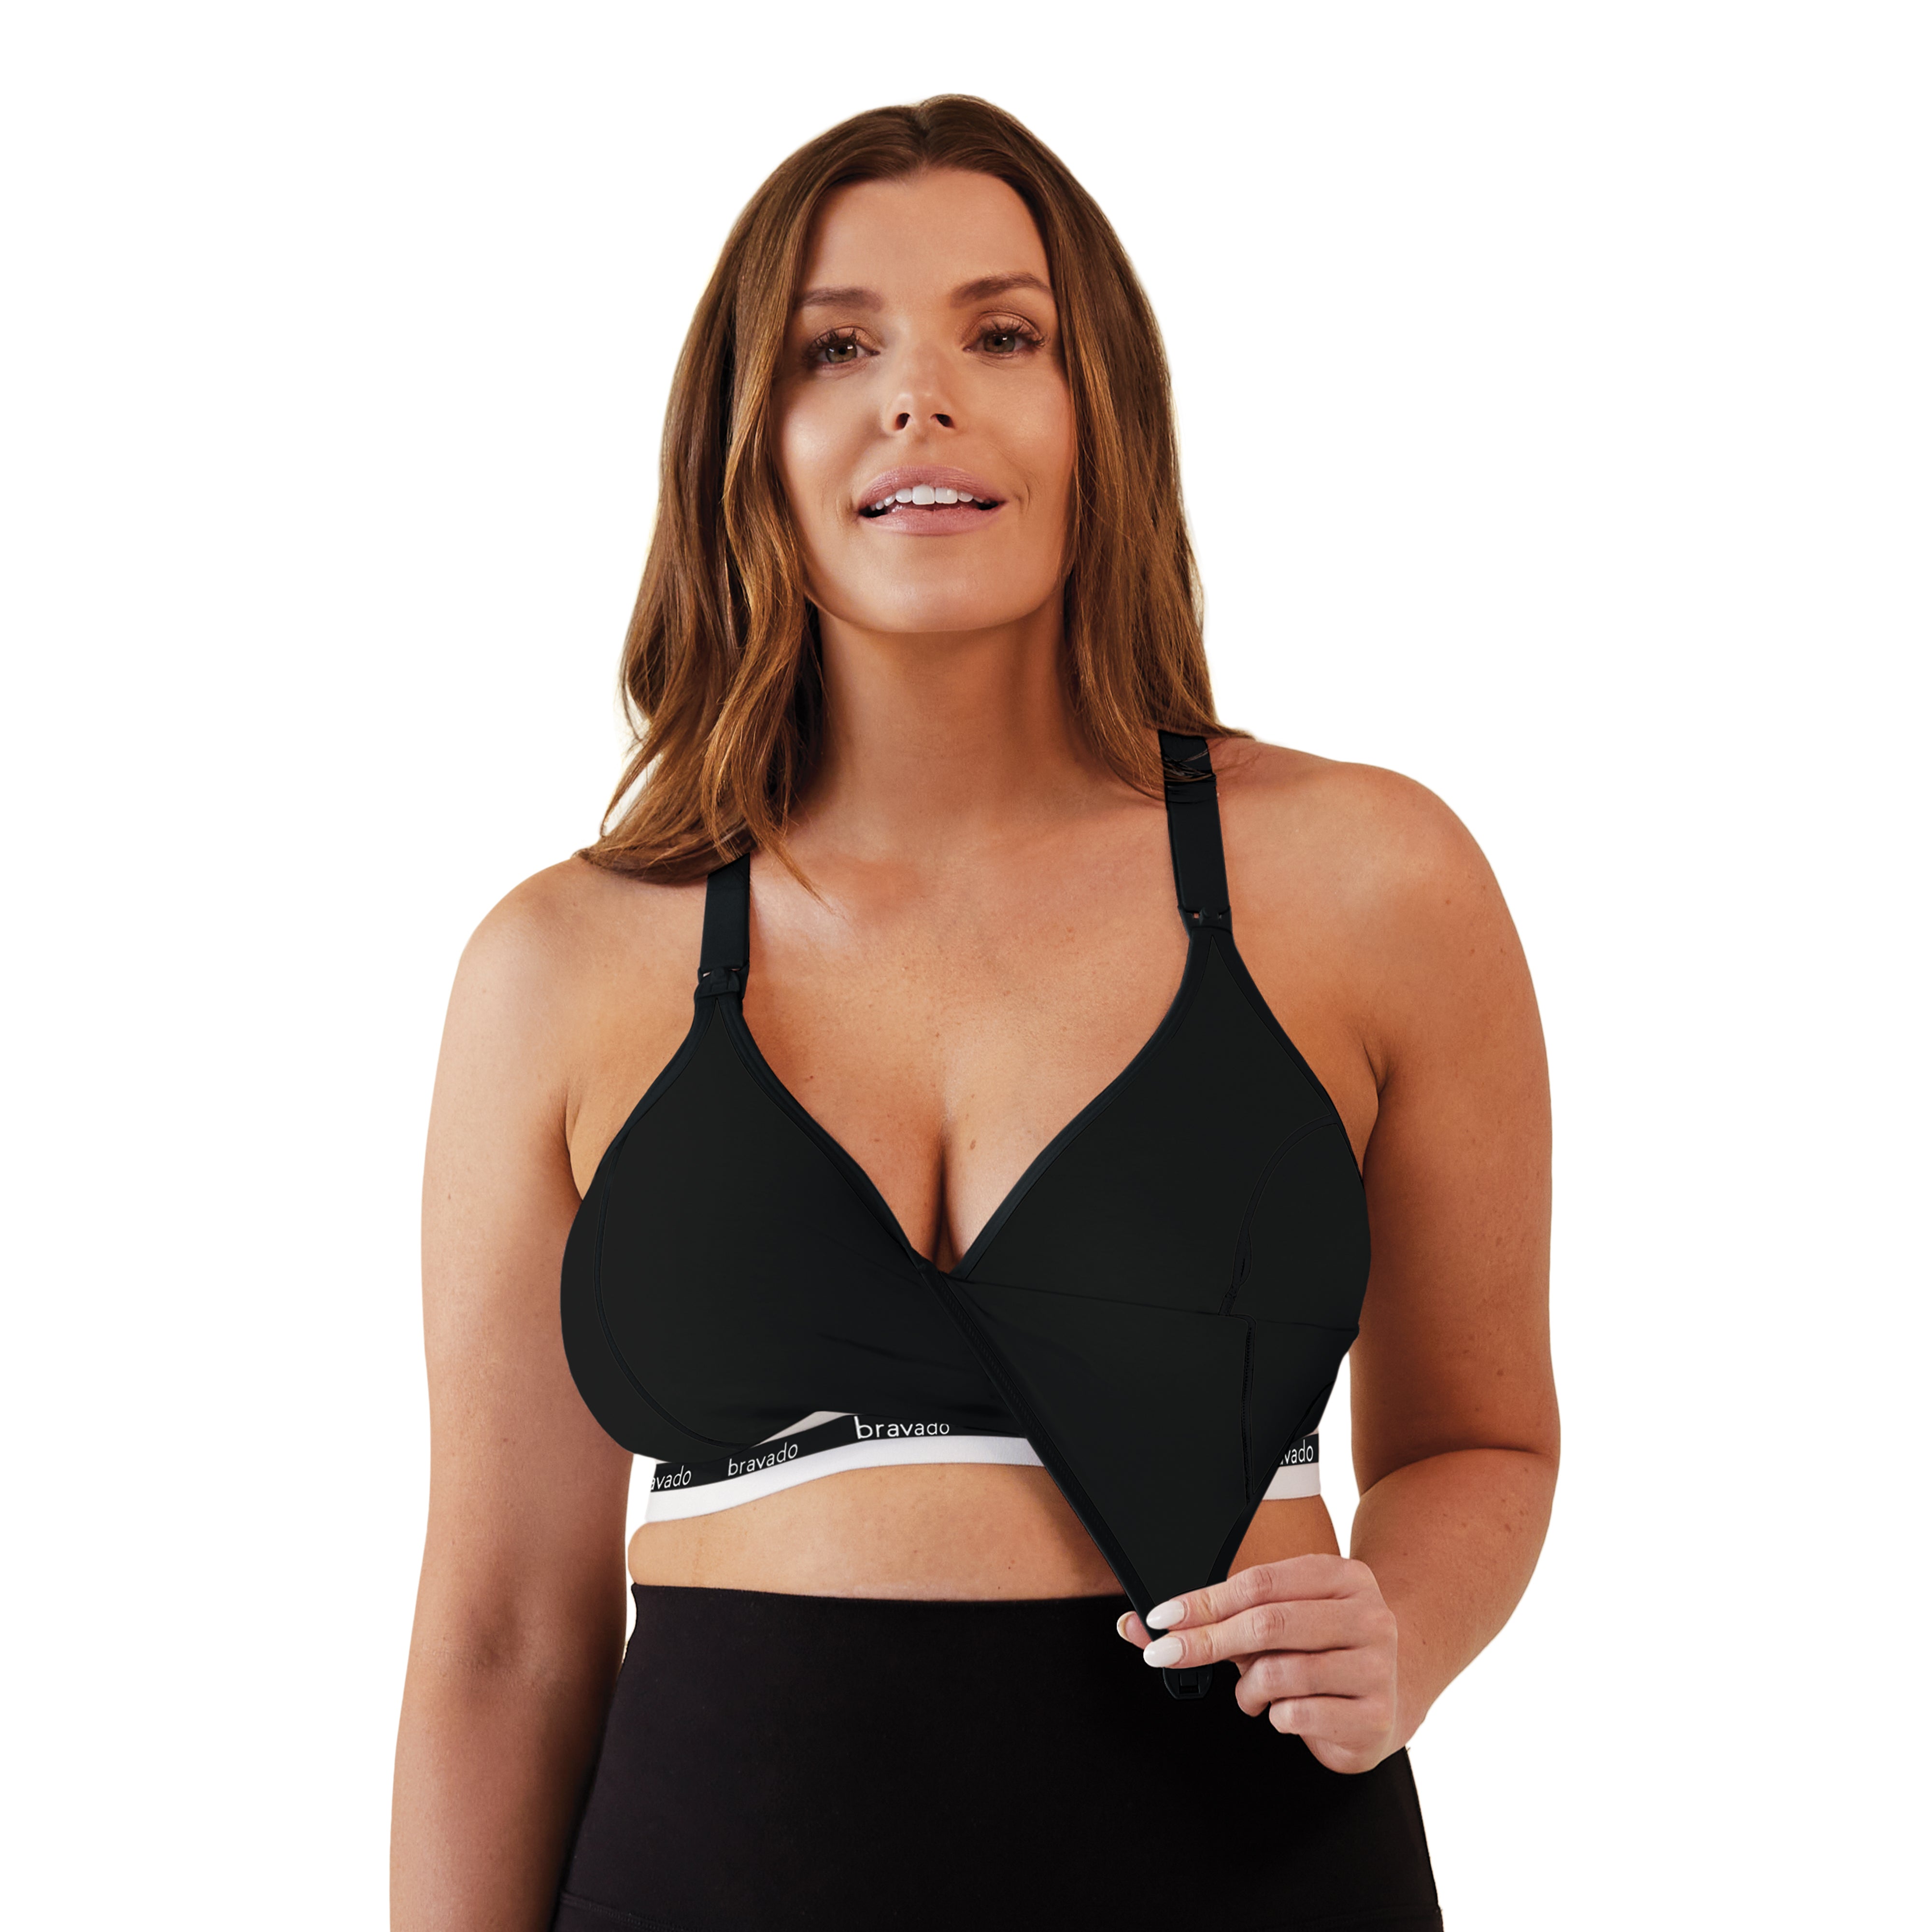 When to Buy a Nursing Bra - Exclusive Pumping